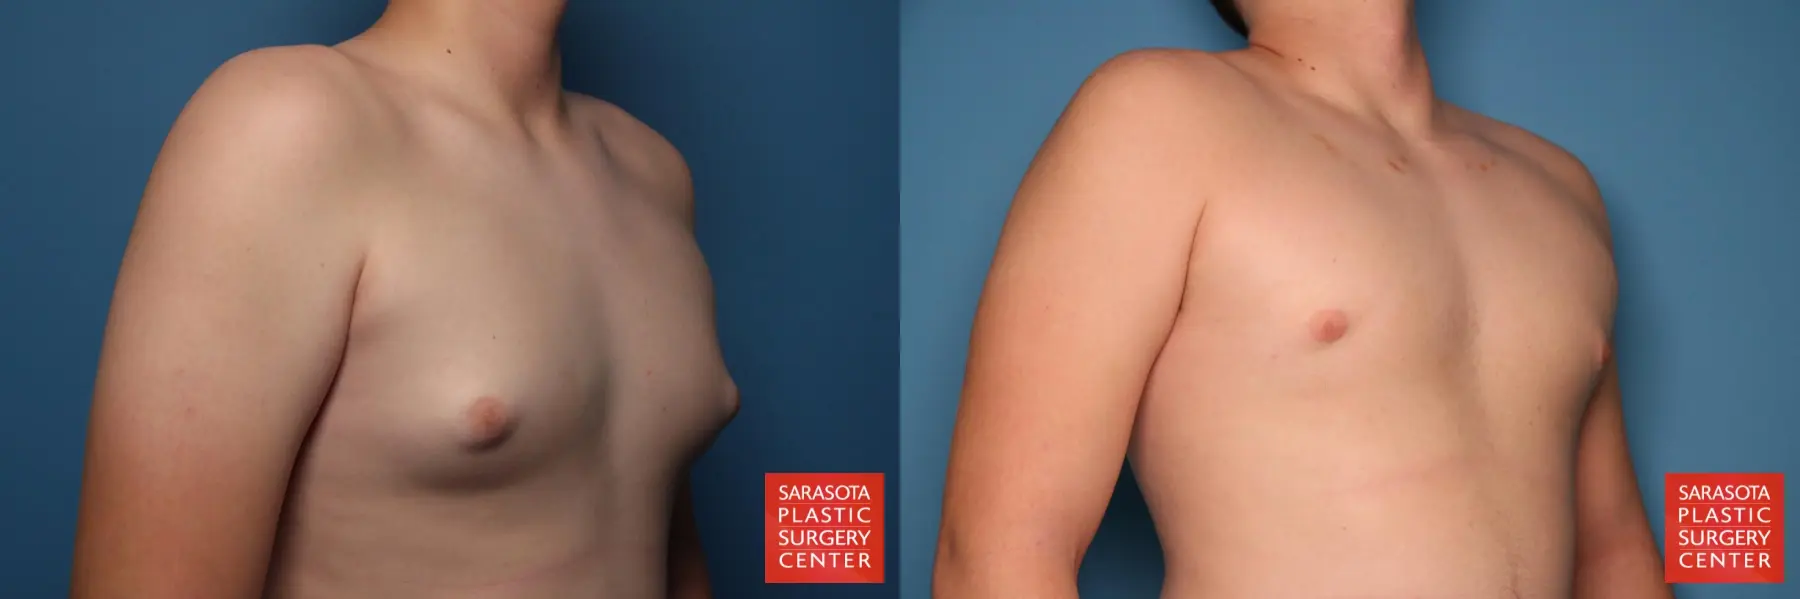 Gynecomastia: Patient 4 - Before and After 4